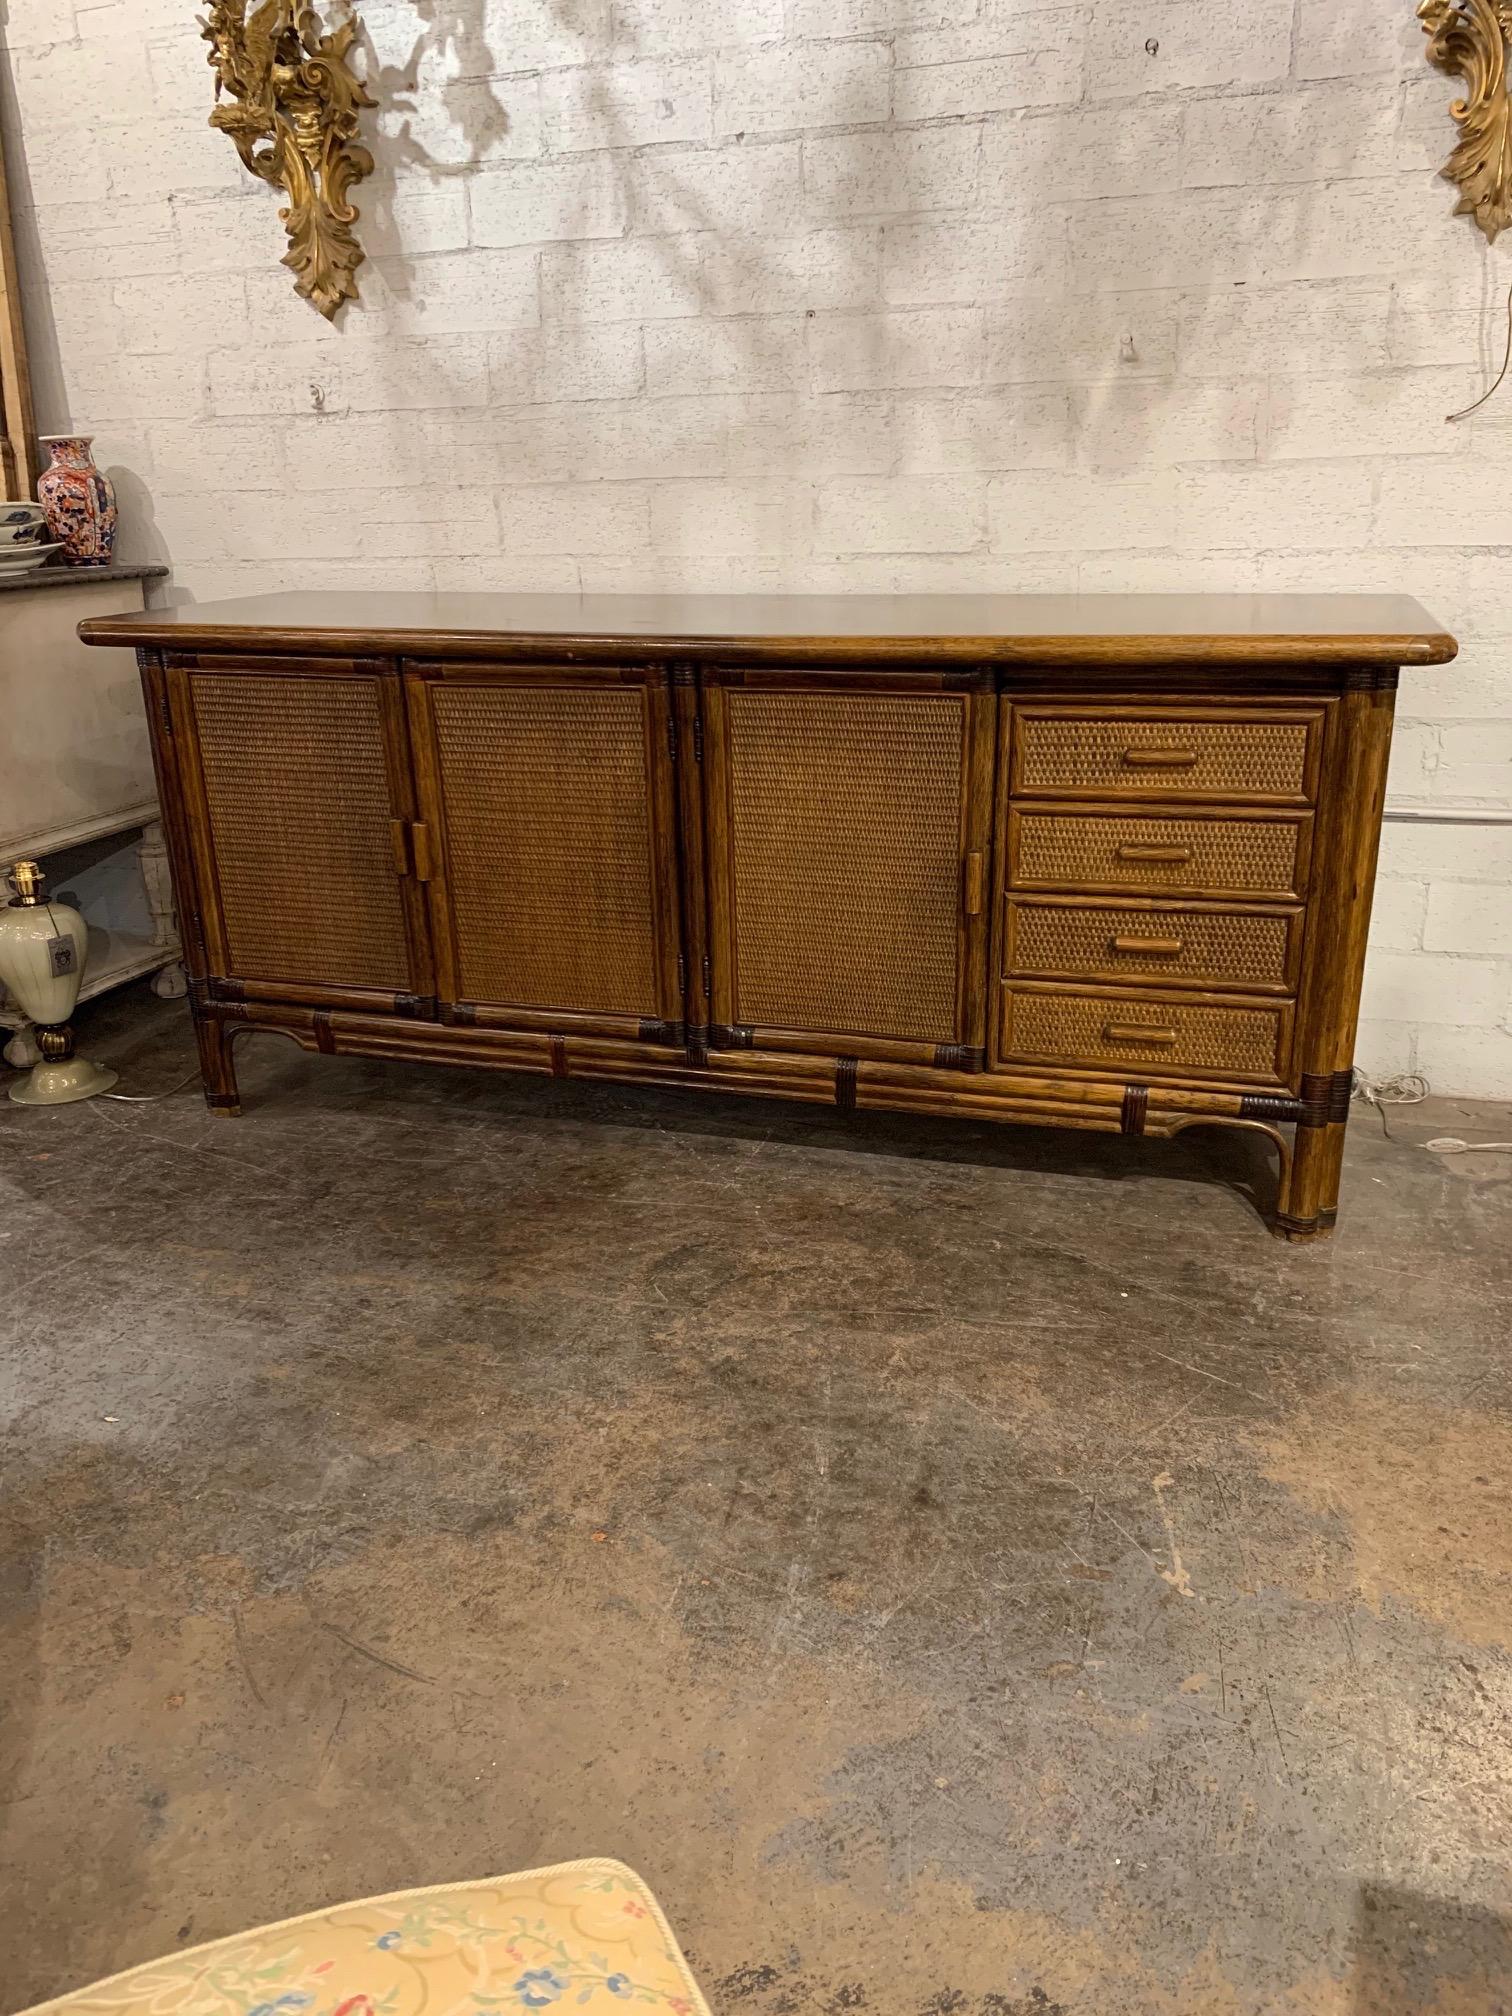 Nice quality Italian vintage bamboo credenza. Nice finish on the top and tons of storage with drawers and shelves inside. Creates an interesting vibe!